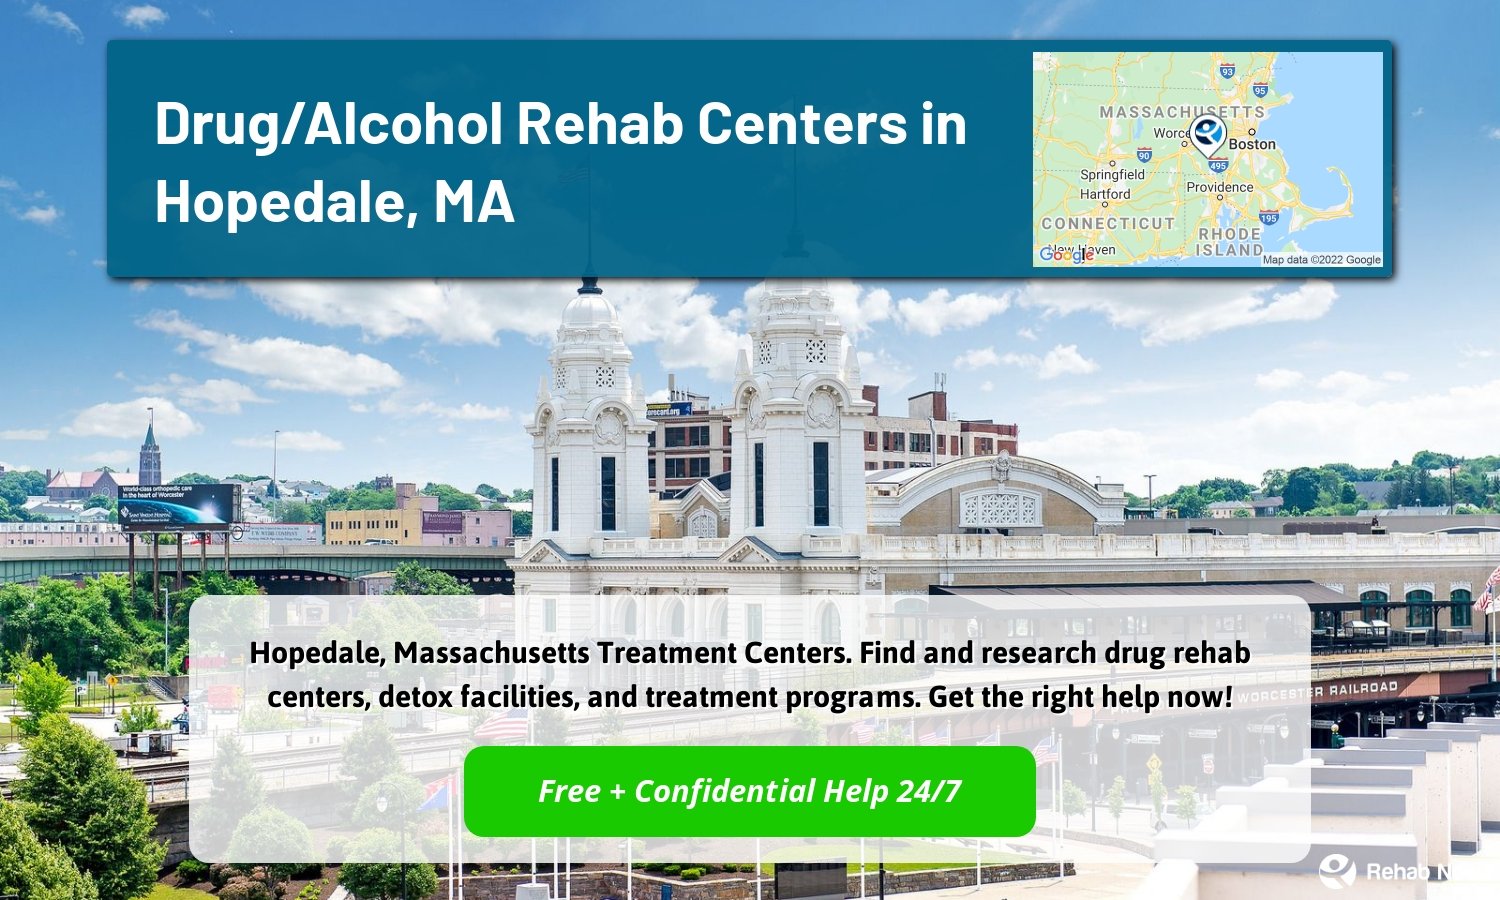 Hopedale, Massachusetts Treatment Centers. Find and research drug rehab centers, detox facilities, and treatment programs. Get the right help now!